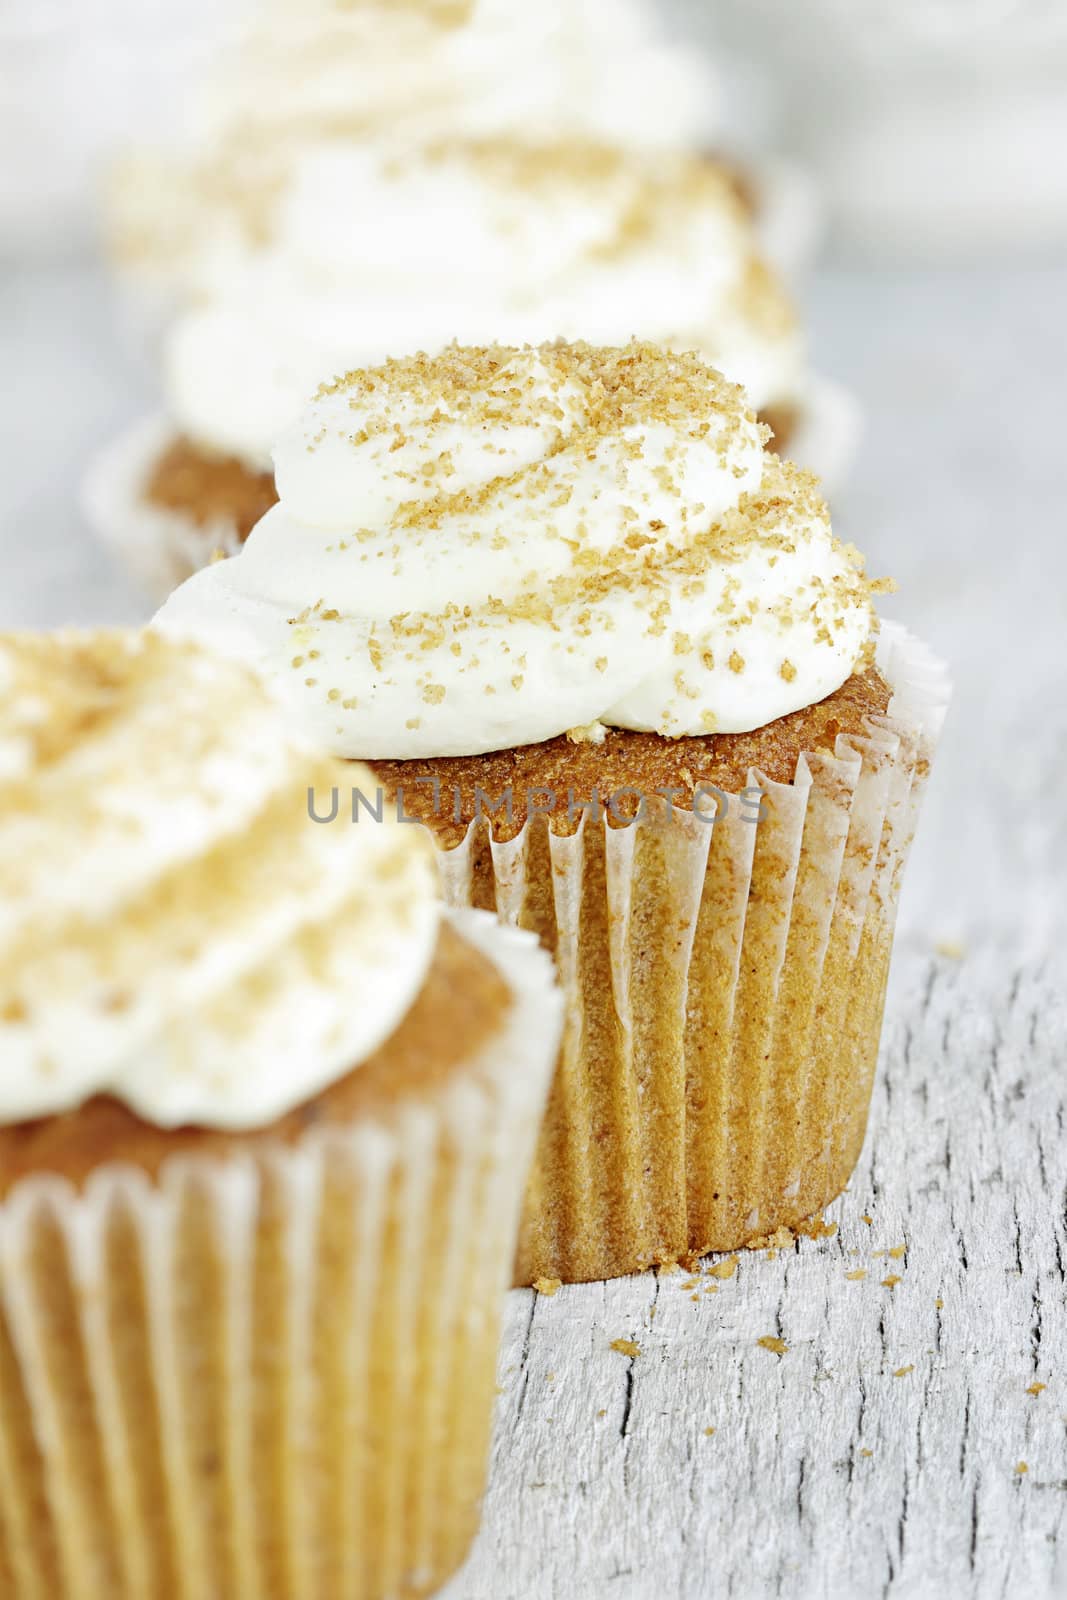 Pumpkin Spice Cupcake with Cream Cheese Icing by StephanieFrey